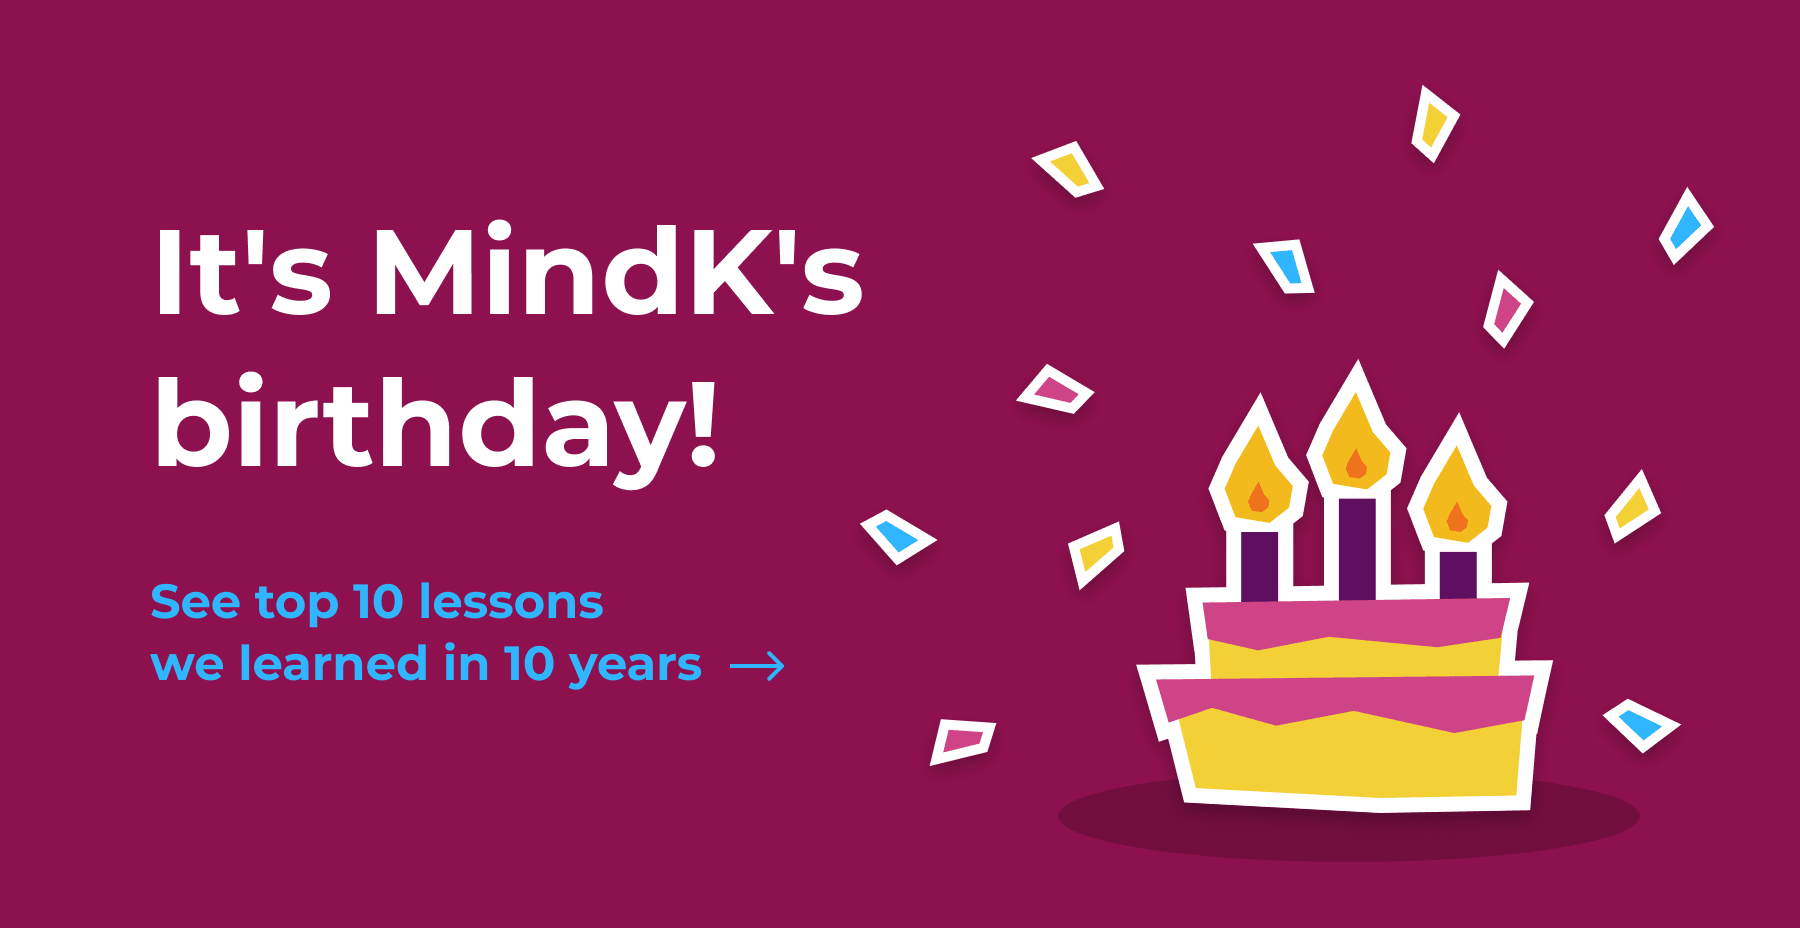 Link to MindK 10th anniversary page